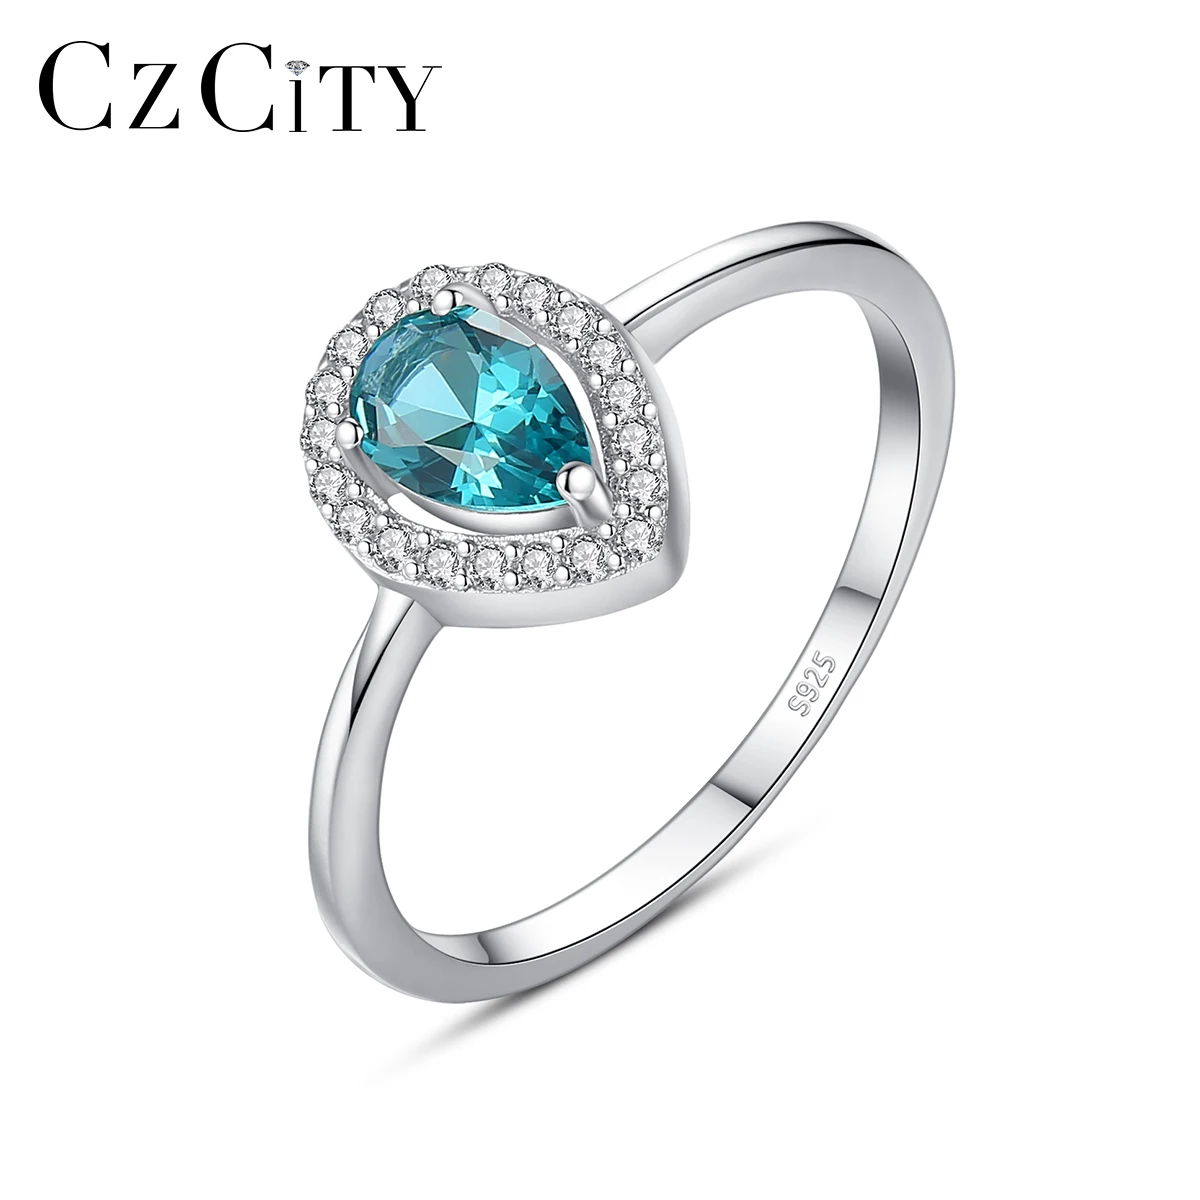 

CZCITY 925 Sterling Silver Trending Gem Wedding Bands Rings Water Topaz Drop Main Stone Ring